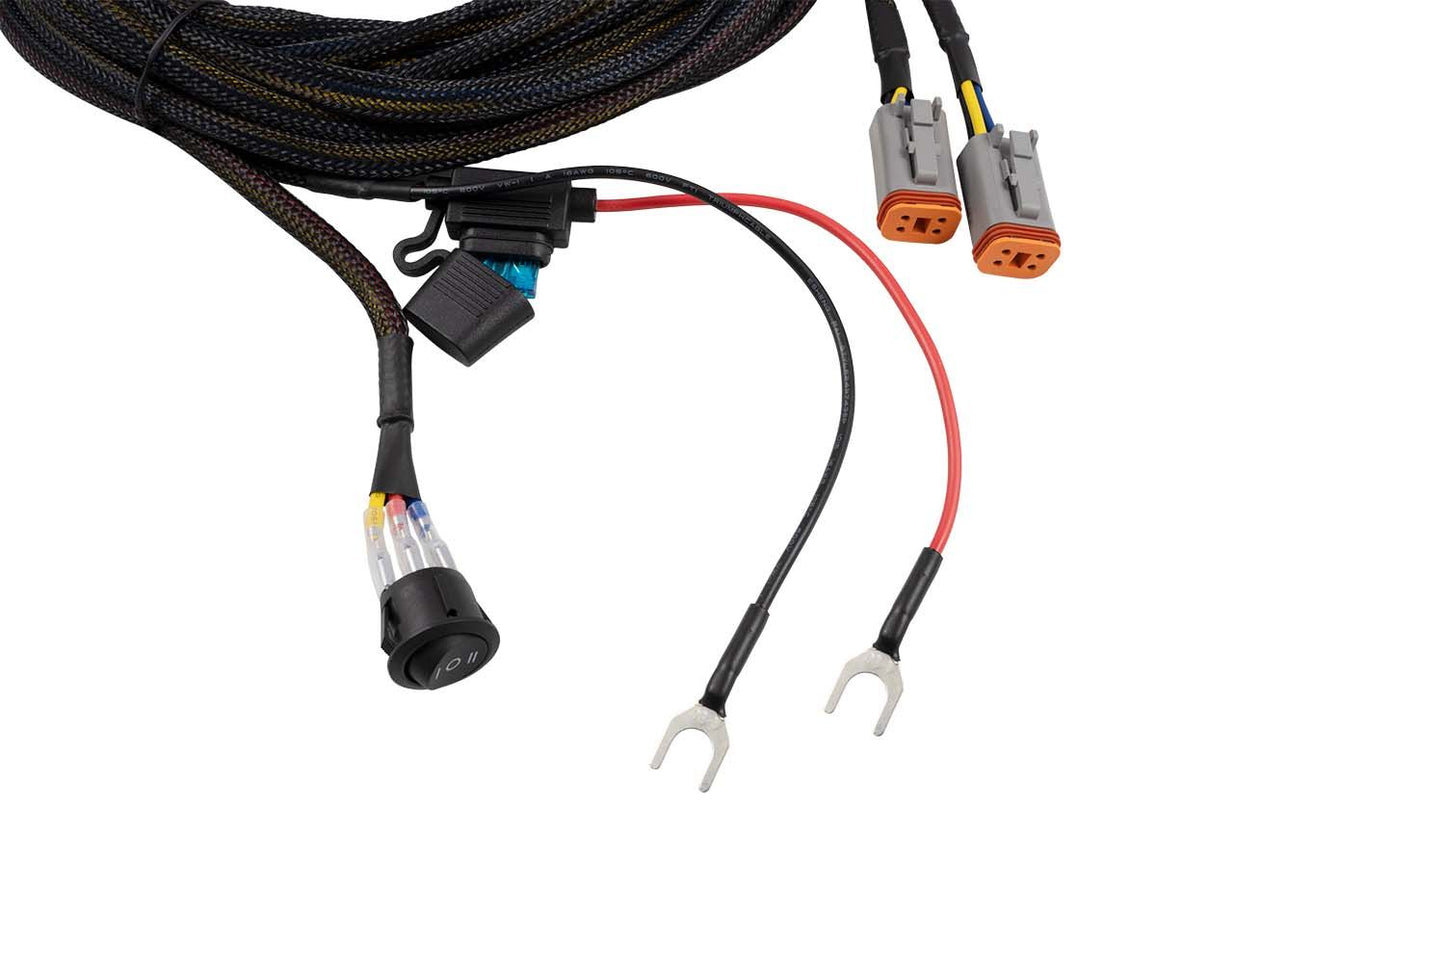 DIODE DYNAMICS: LIGHT DUTY DUAL OUTPUT 4-PIN OFFROAD WIRING HARNESS